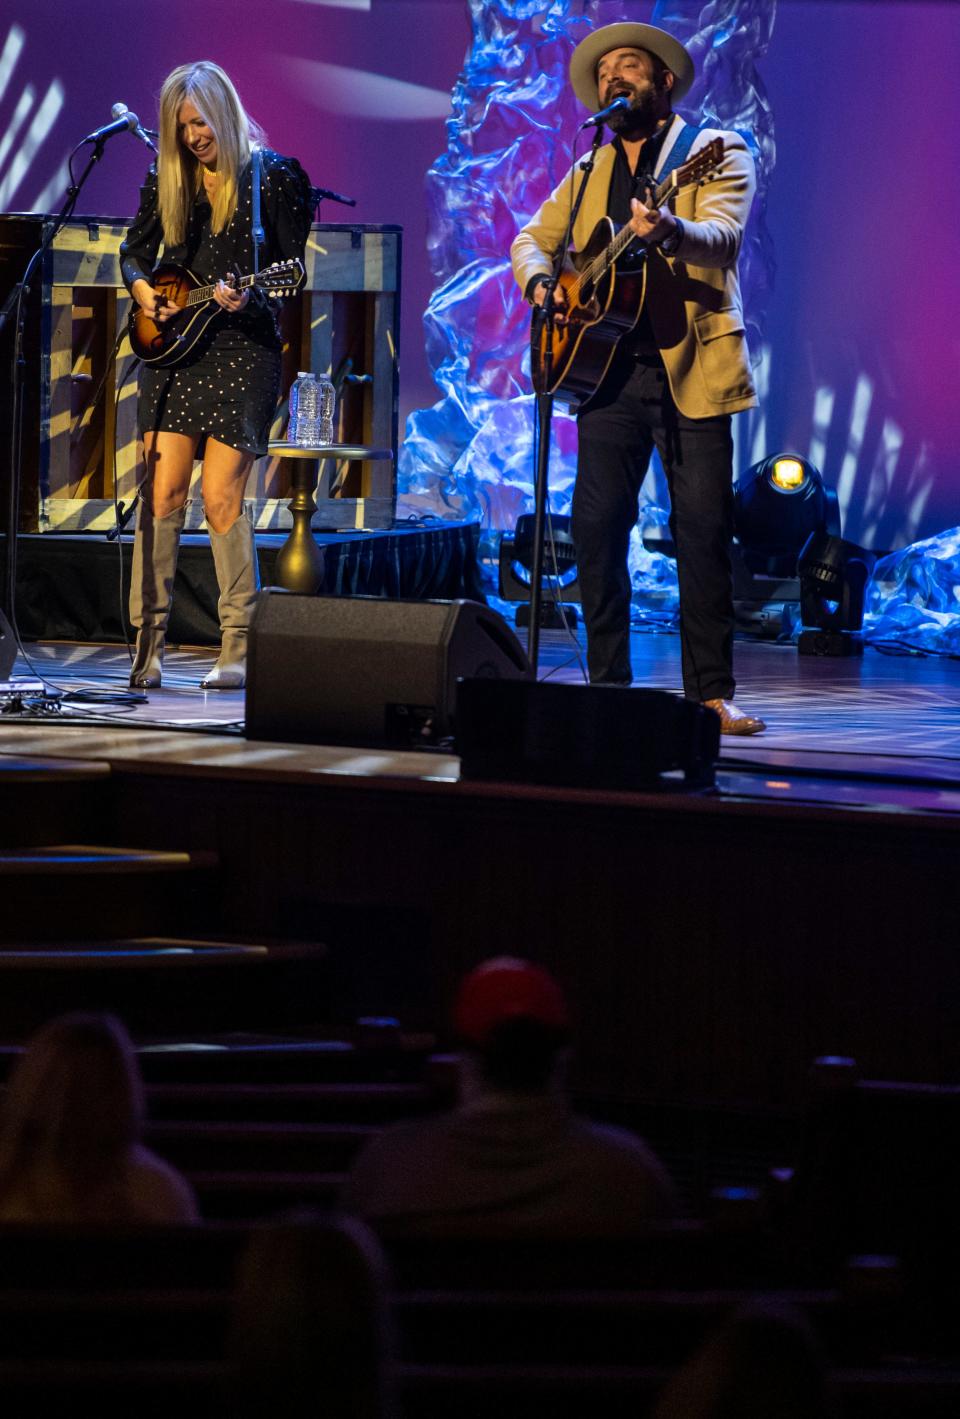 Drew and Ellie Holcomb’s Neighborly Christmas comes to the Orpheum on Dec. 21.